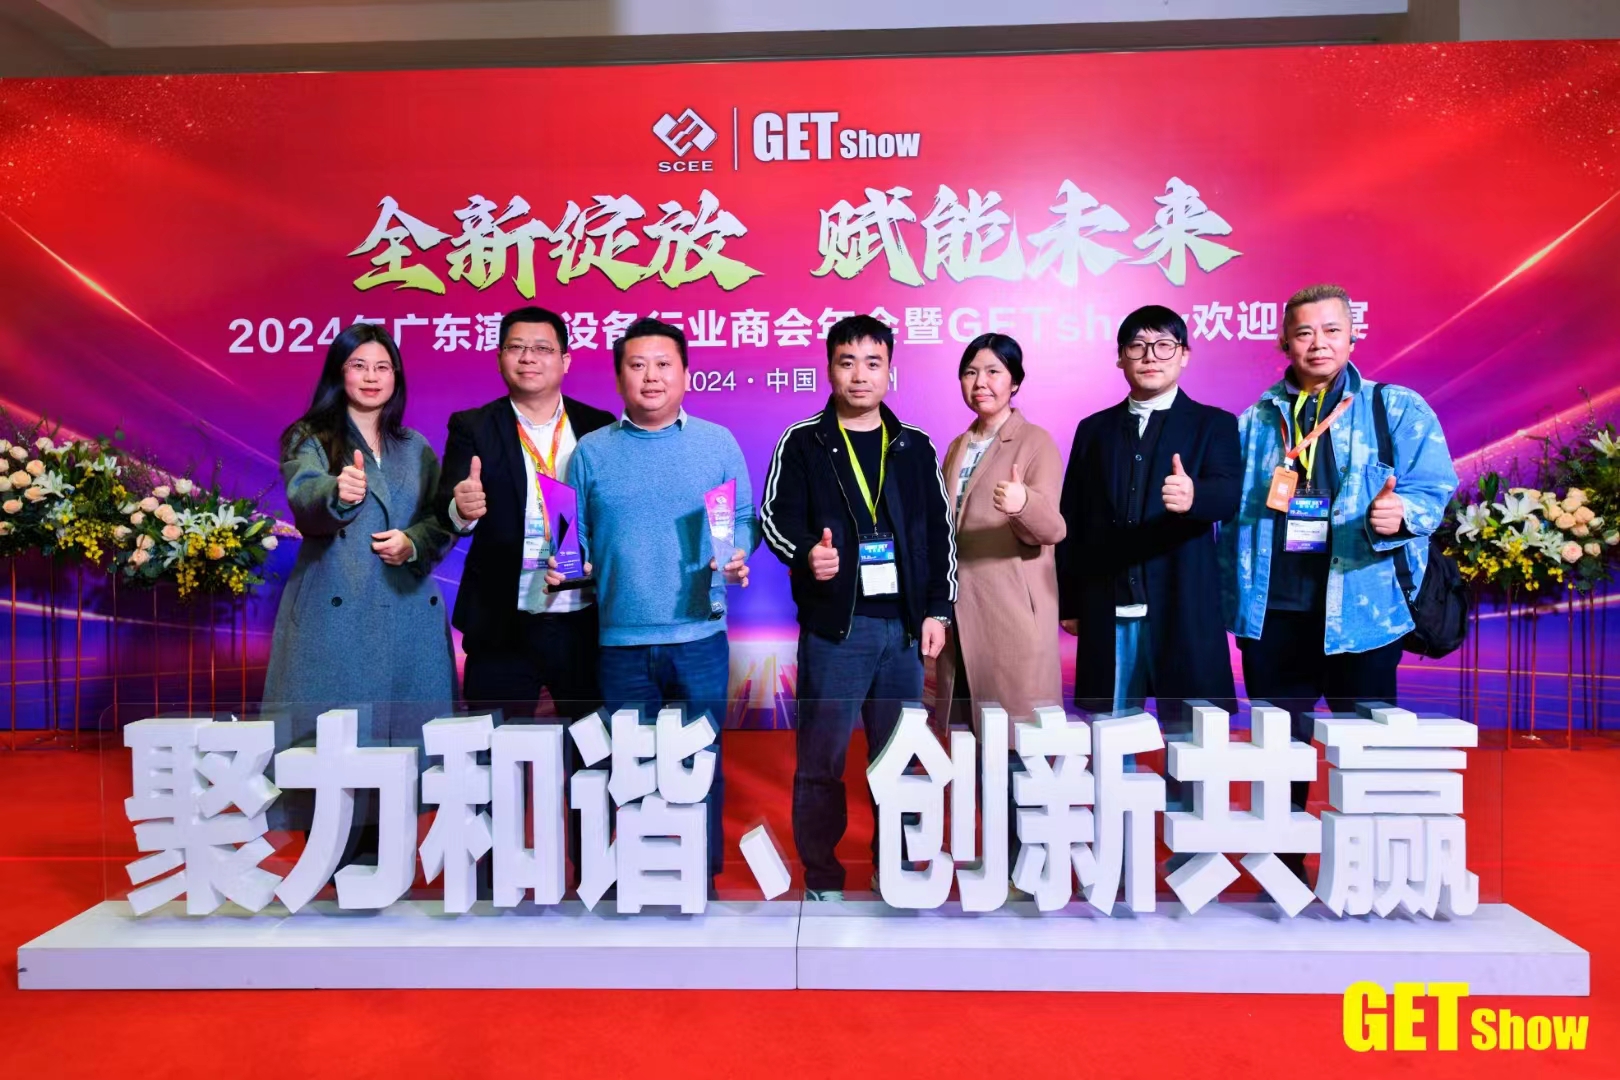 Showtechled : The shining star of Guangzhou GETshow, won another double award !